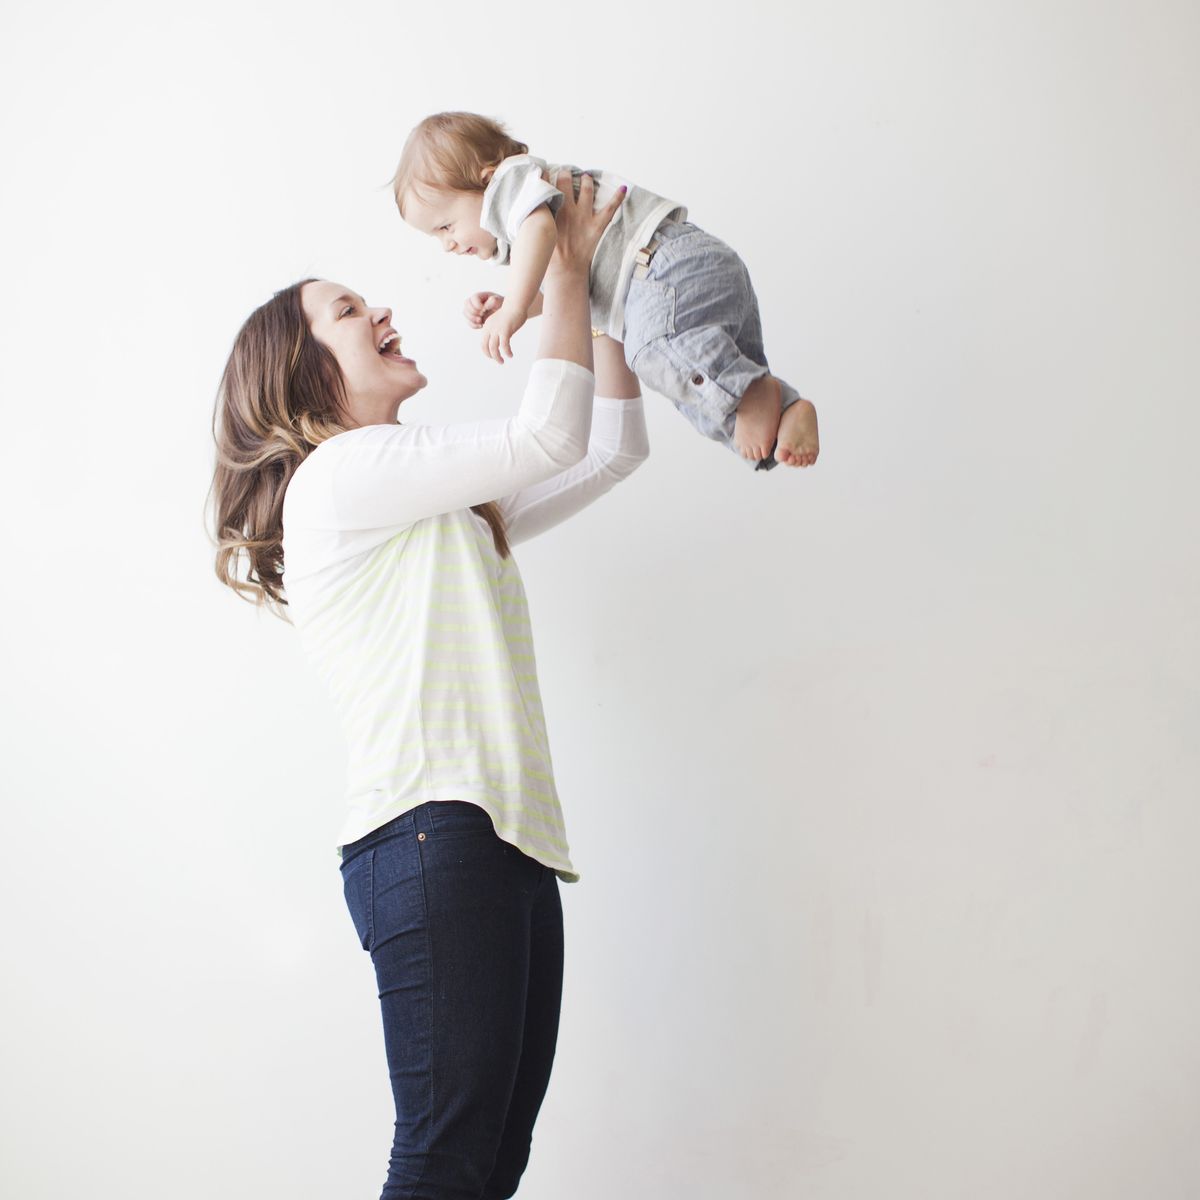 young mother lifting baby boy 6 11 months mid air